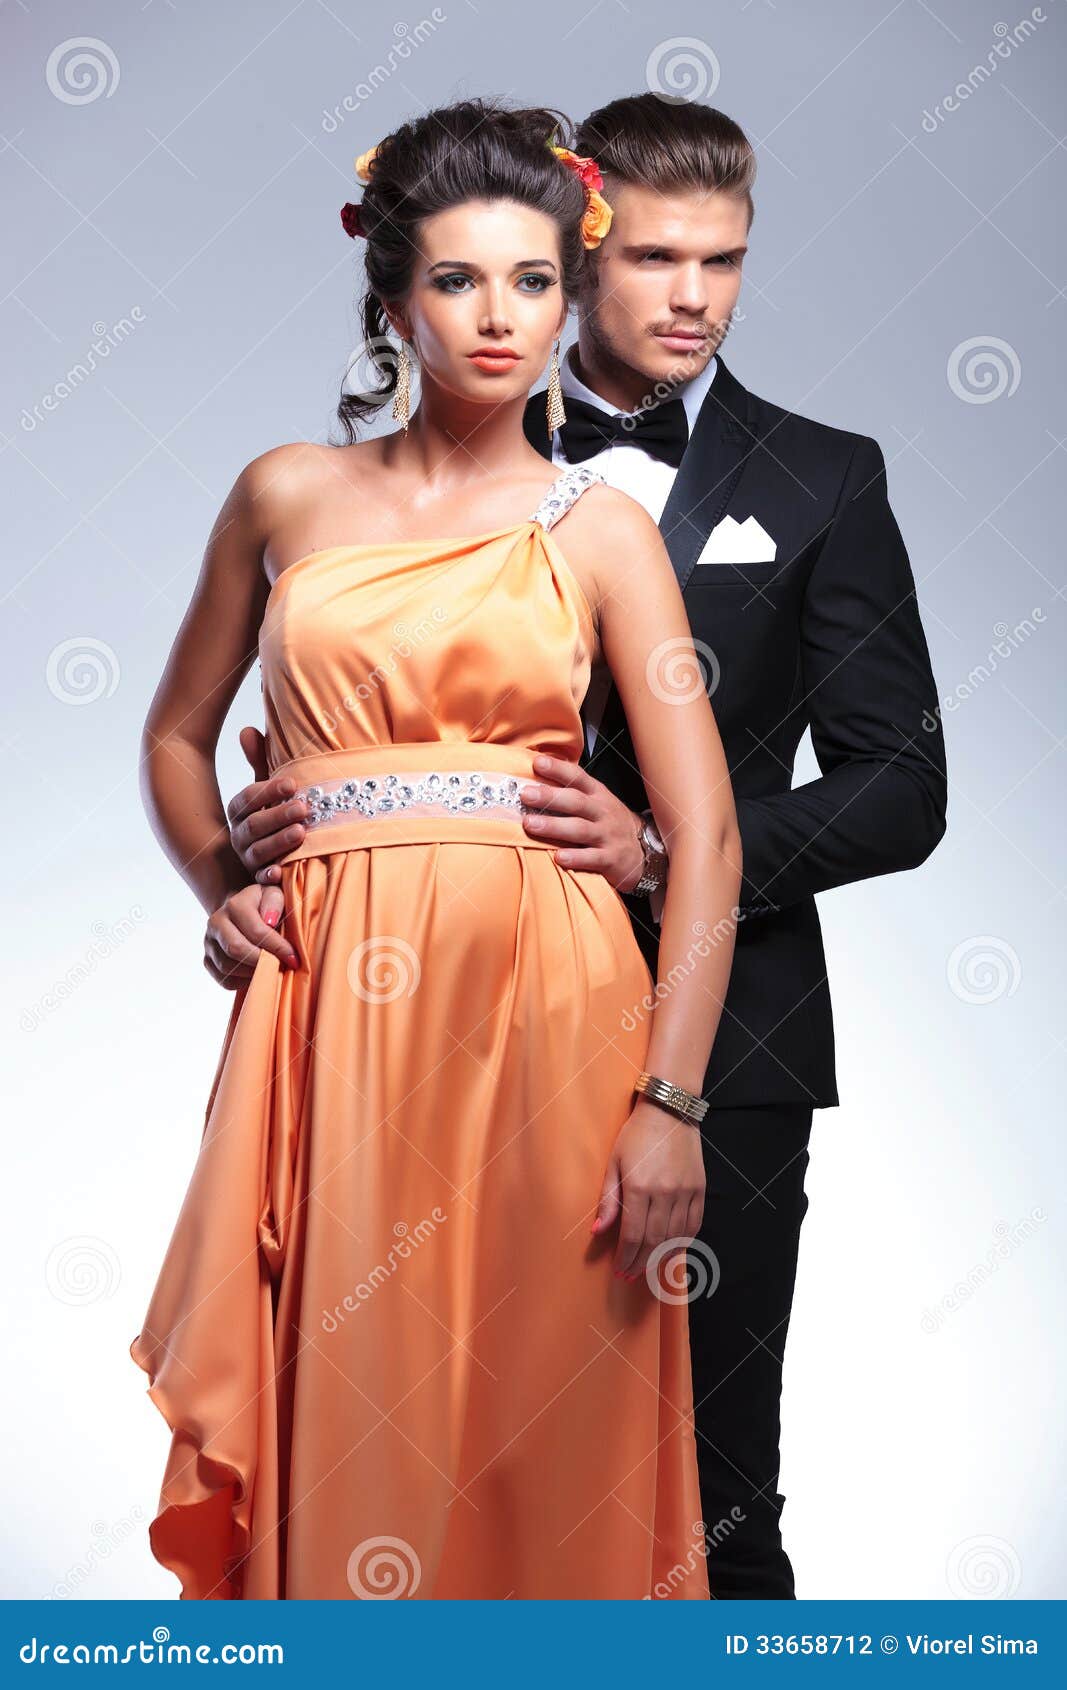 Fashion Couple With Man Behind, Looking Away Stock Photo 